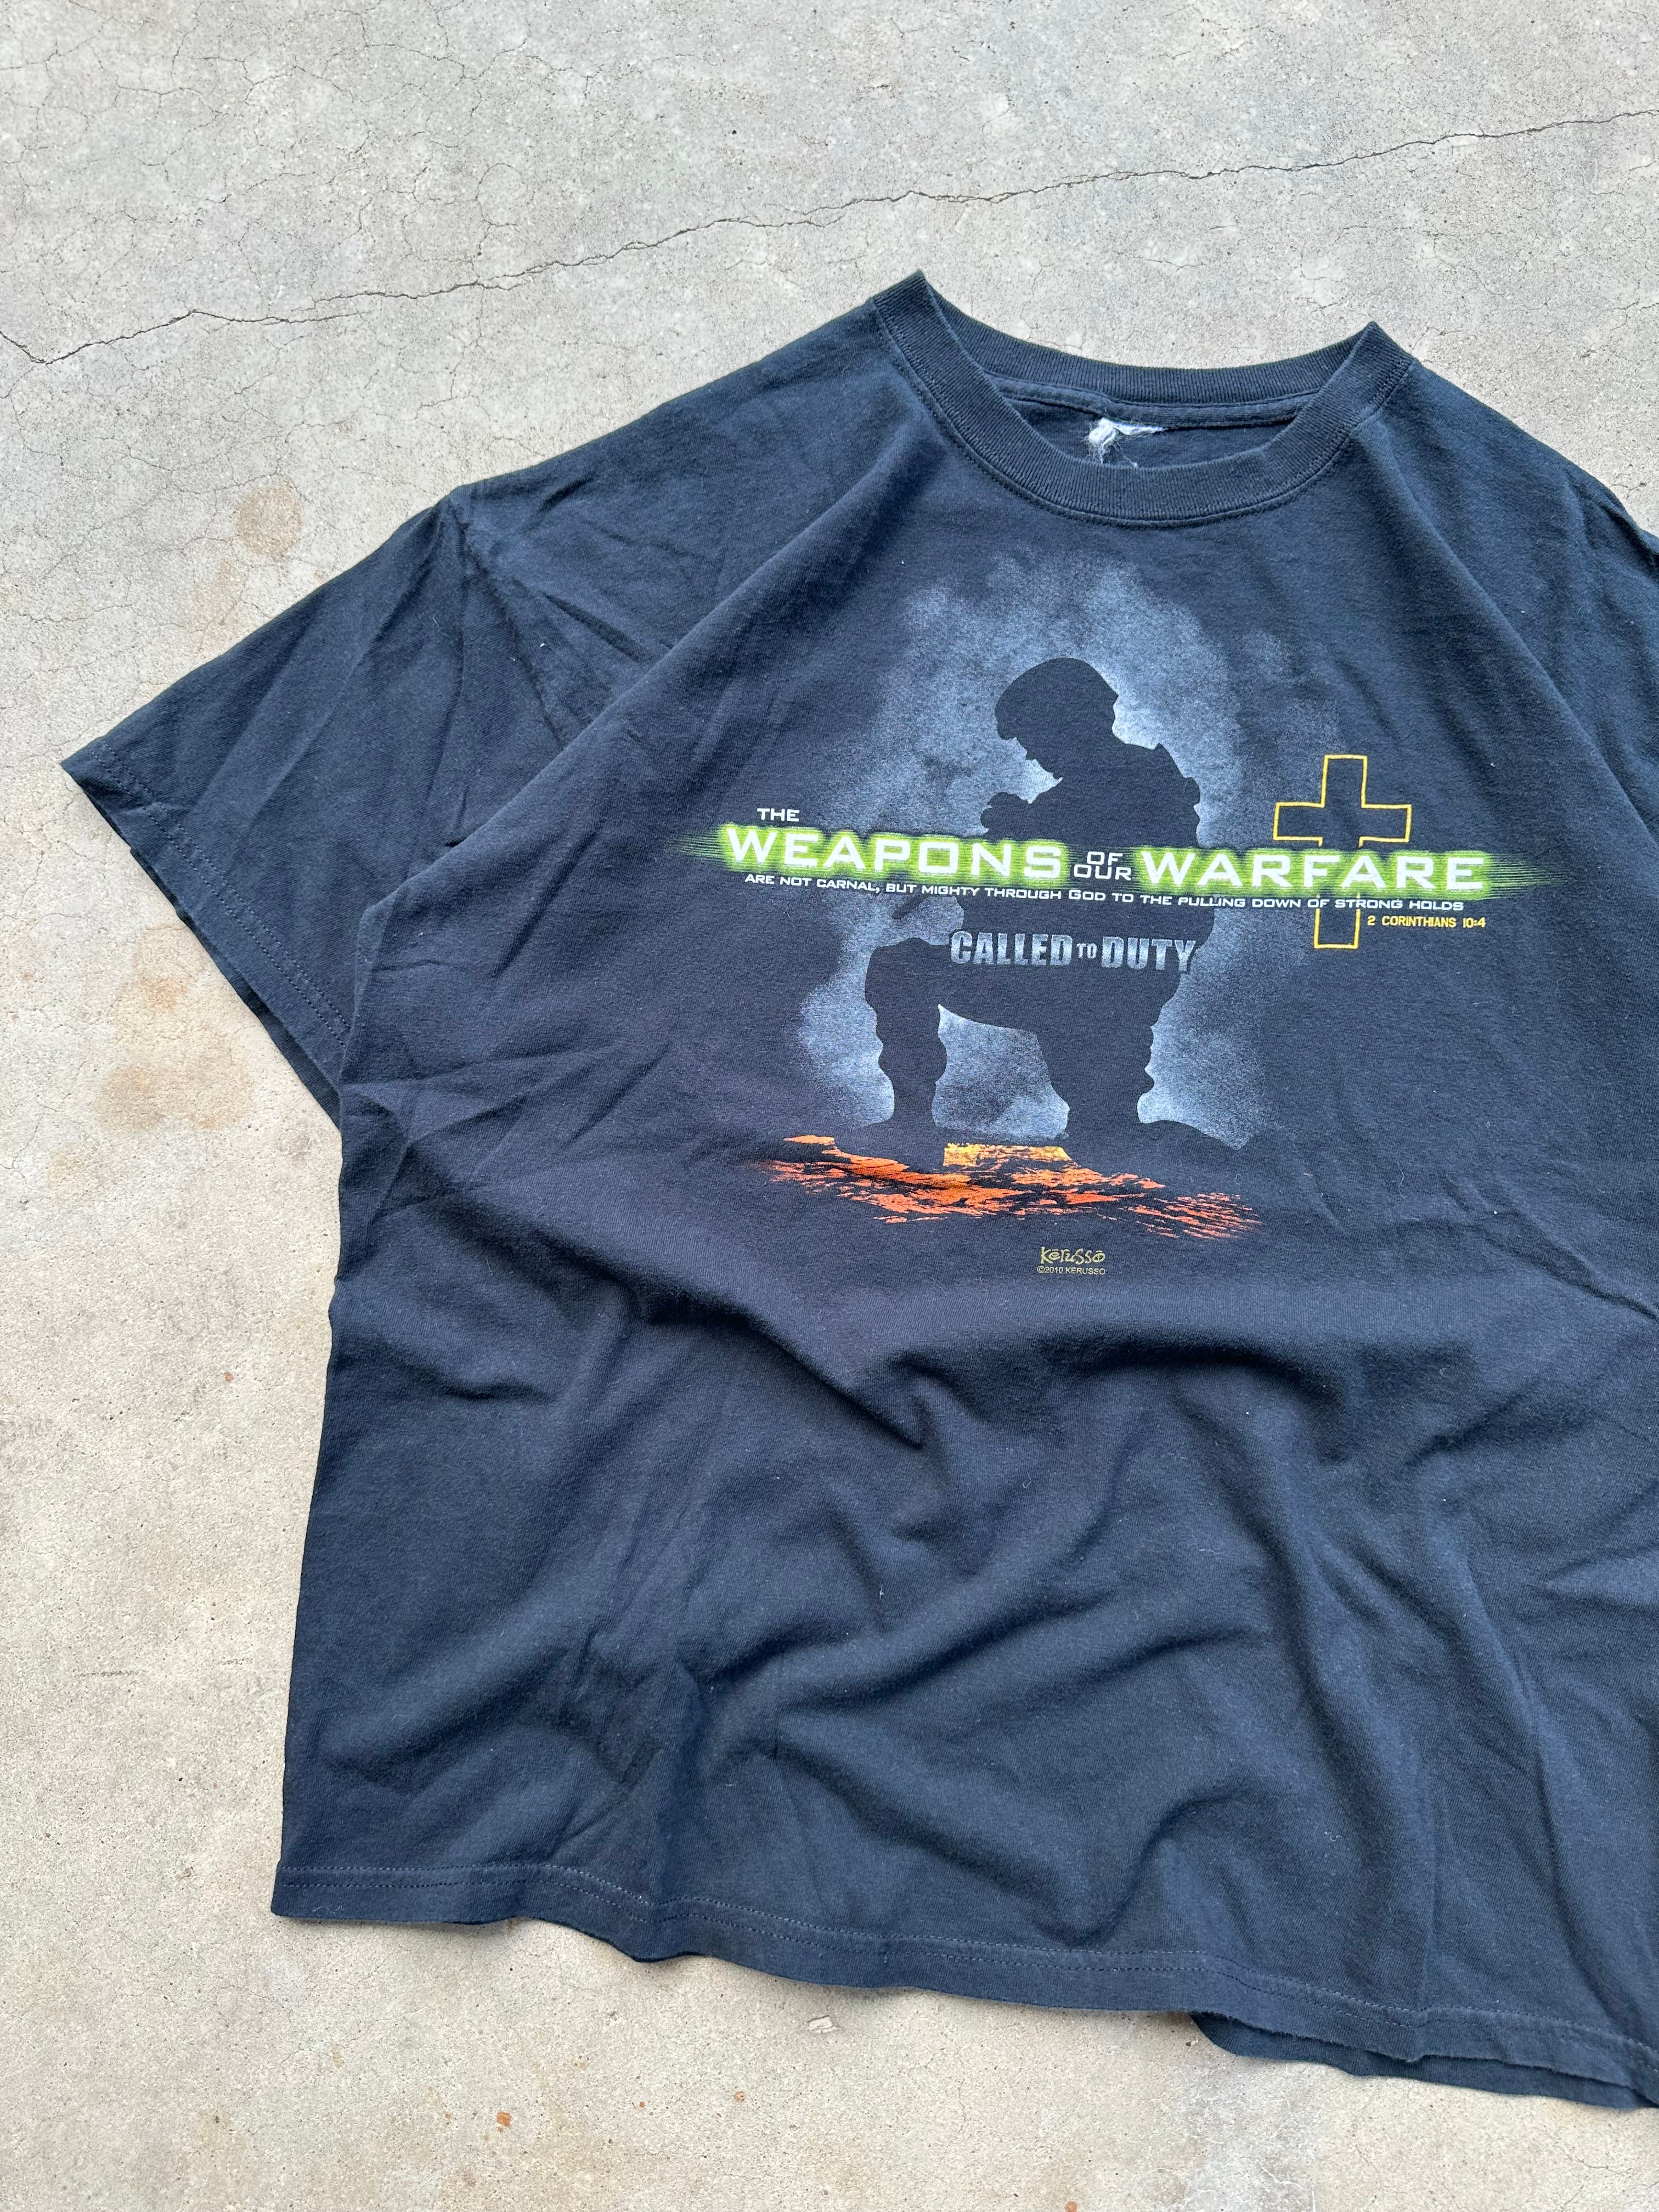 2010 Jesus Weapons of Warfare Called to Duty T-Shirt (XL)